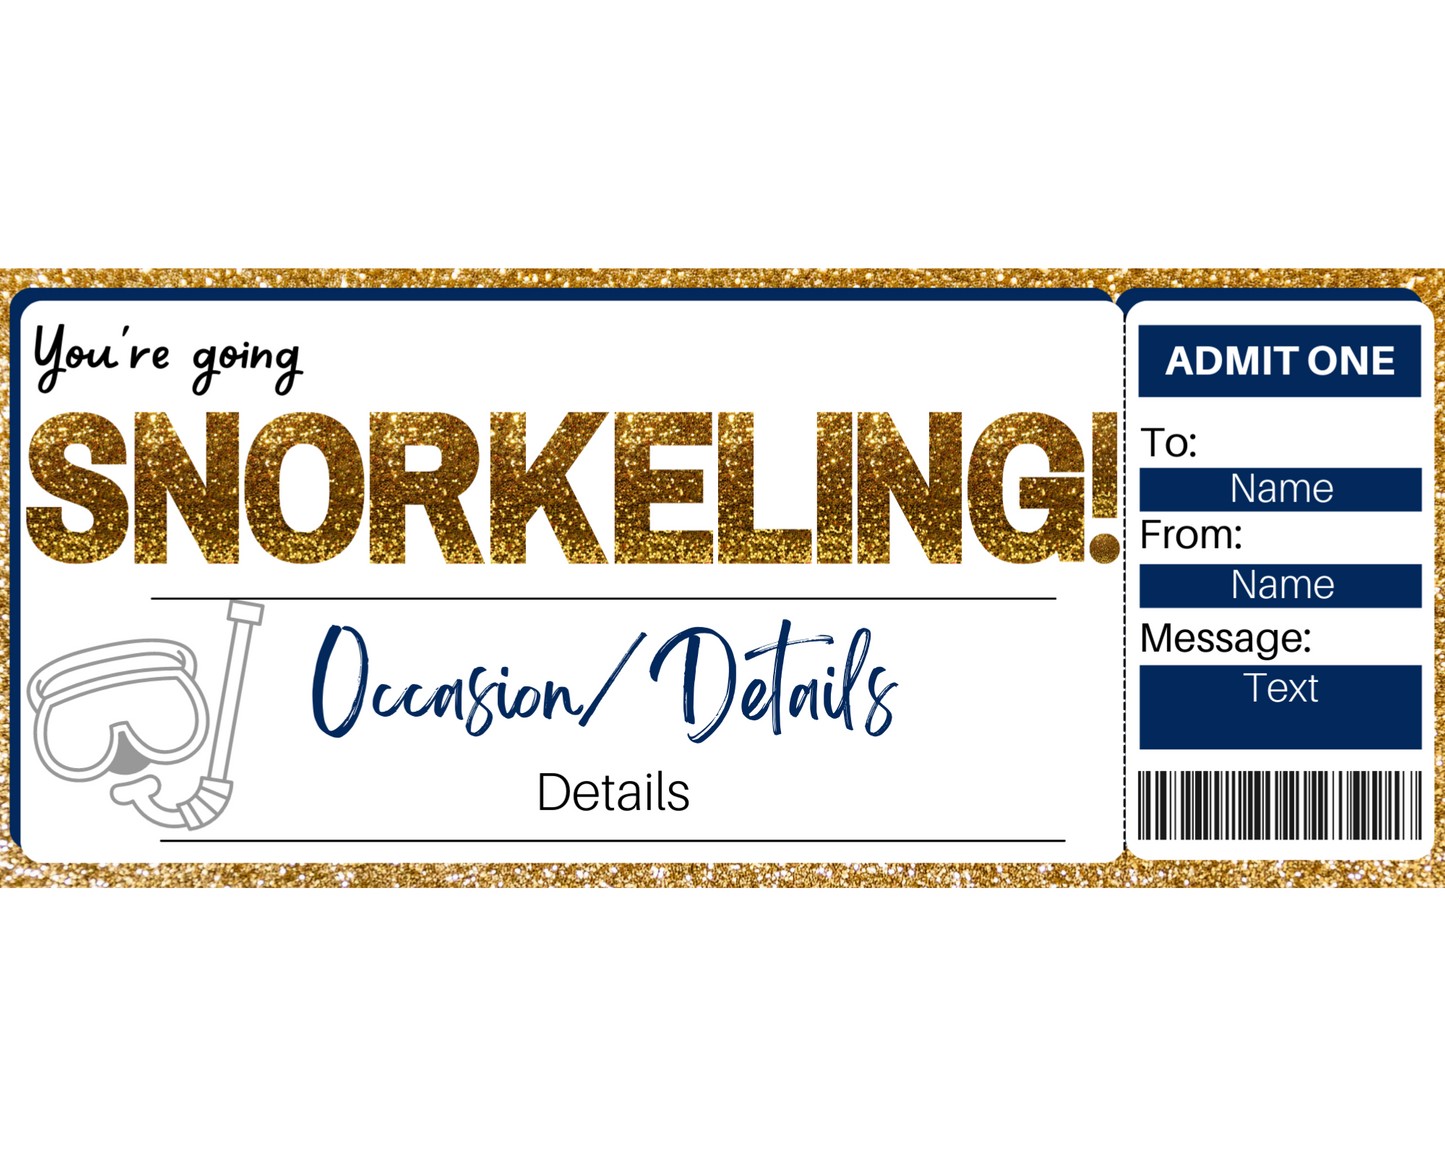 Snorkeling Gift Certificate Template